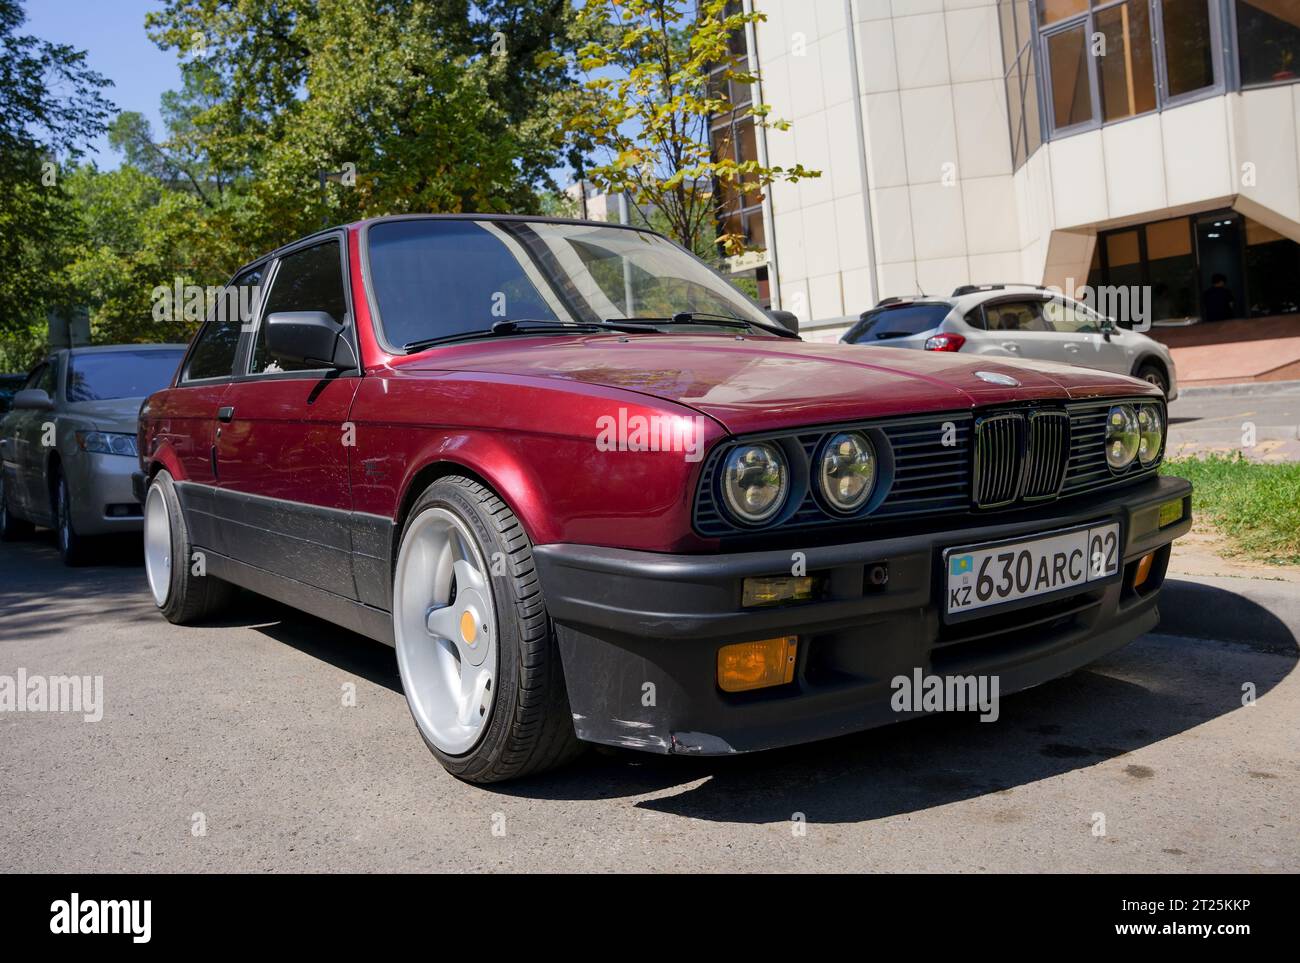 Almaty, Kazakhstan - August 25, 2023: The front of an old BMW 3 Series coupe is burgundy. Street parking Stock Photo